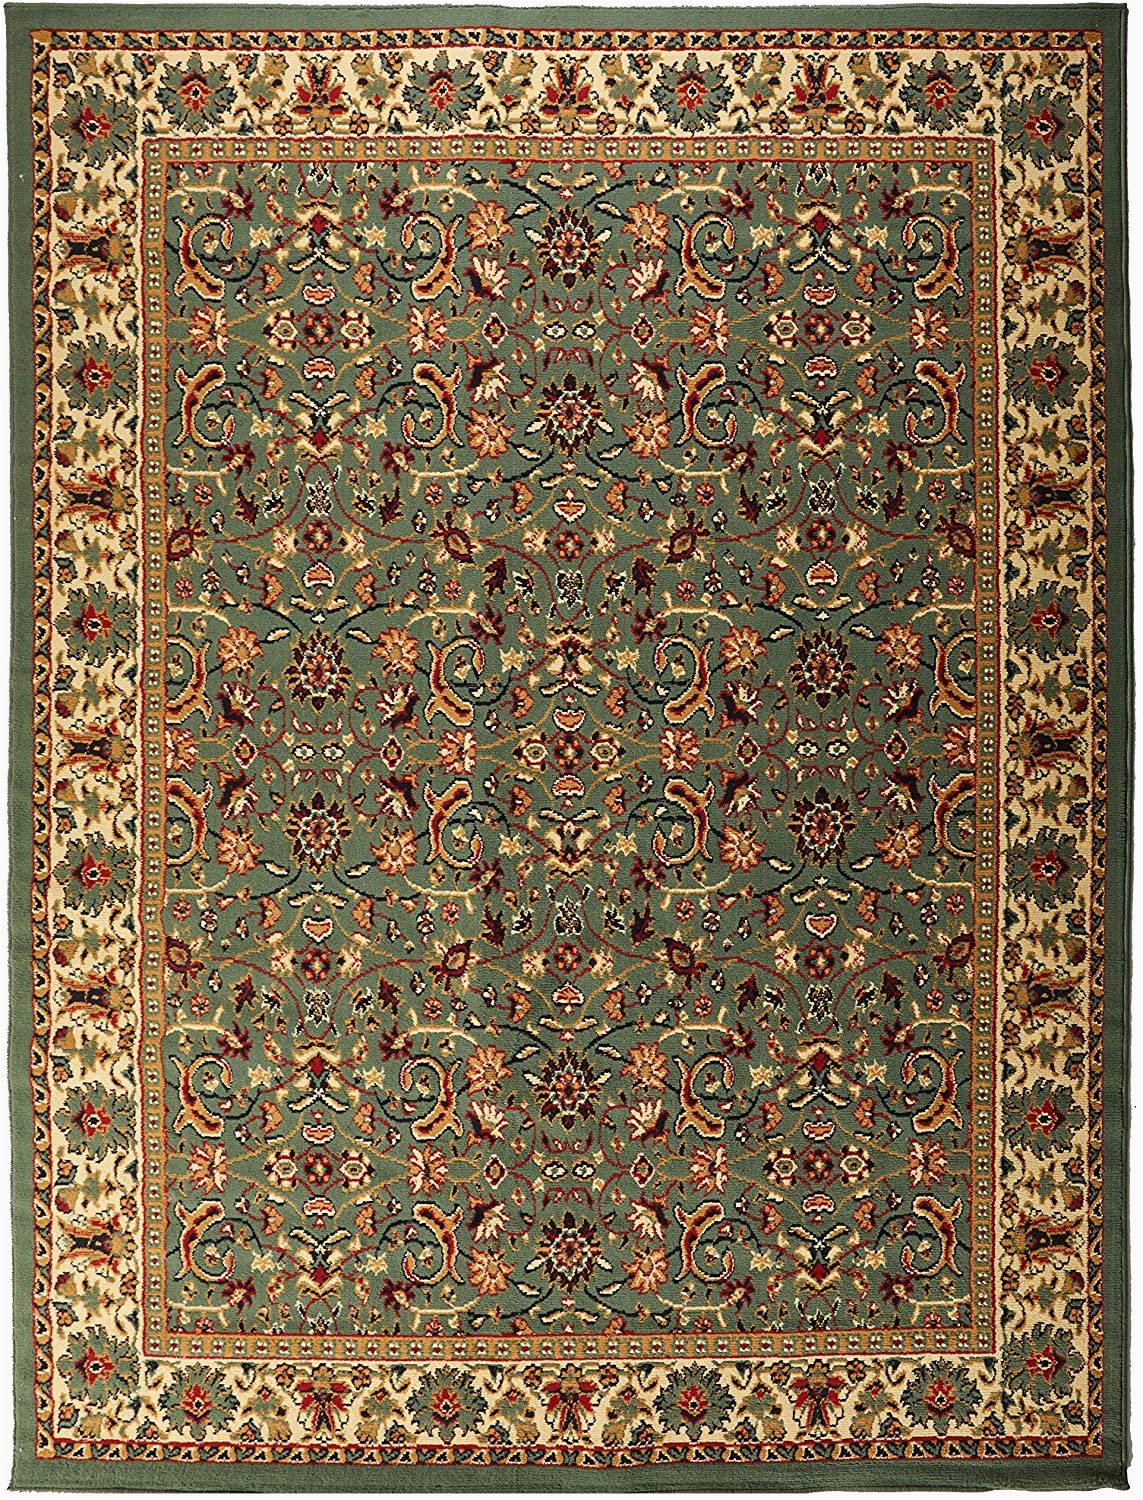 8×10 area Rugs Under 100.00 Traditional area Rug Medallion Green Rugs for Living Room 8×10 Under 100